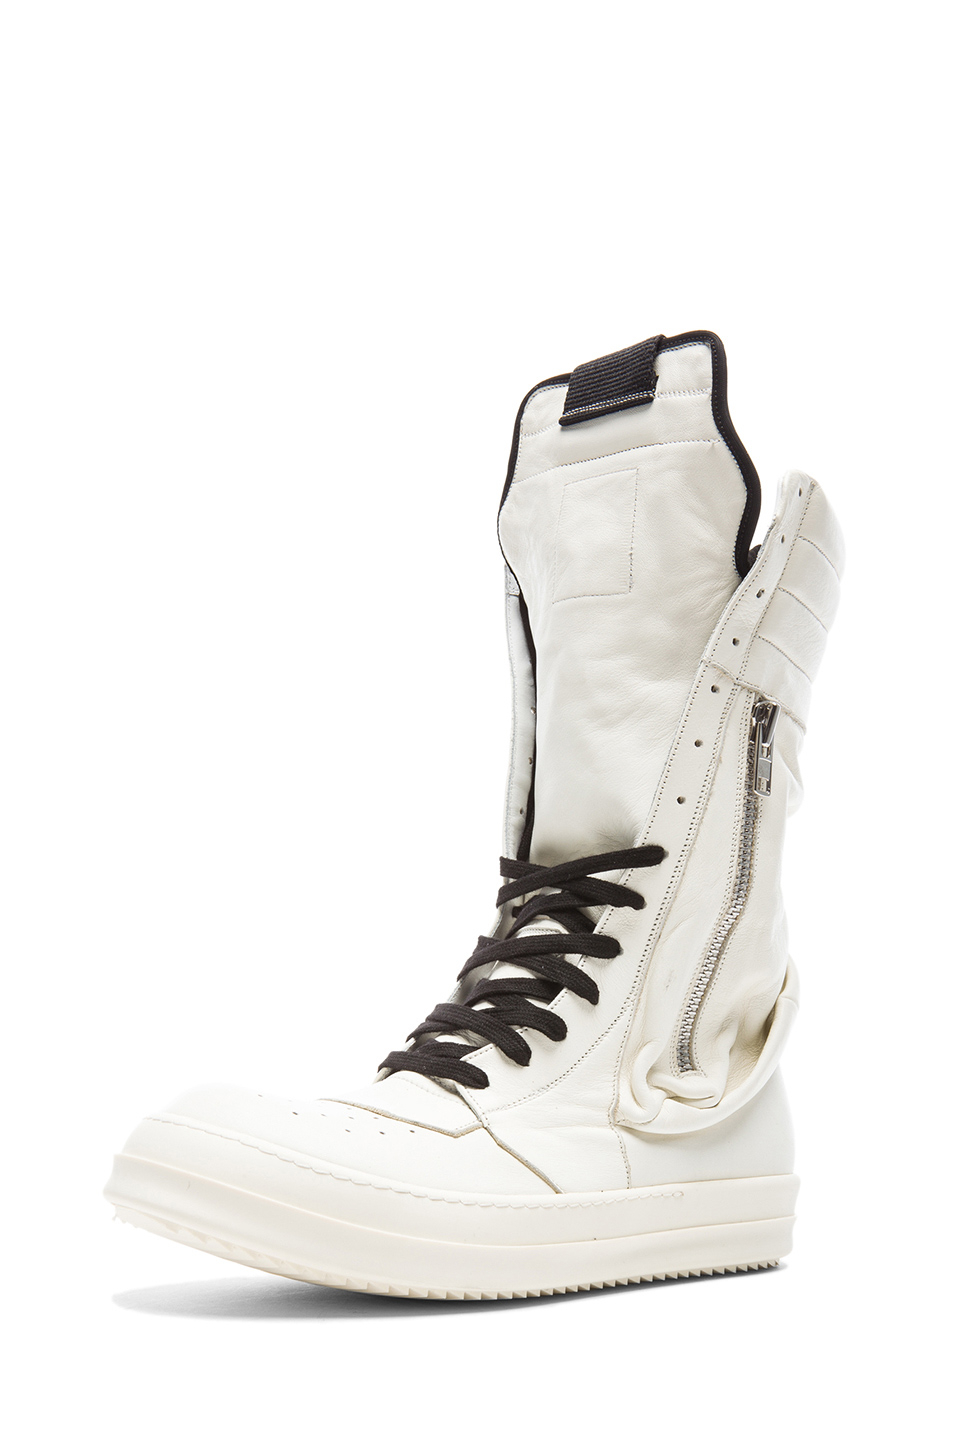 Rick Owens Cargobasket Leather Boots in White for Men | Lyst